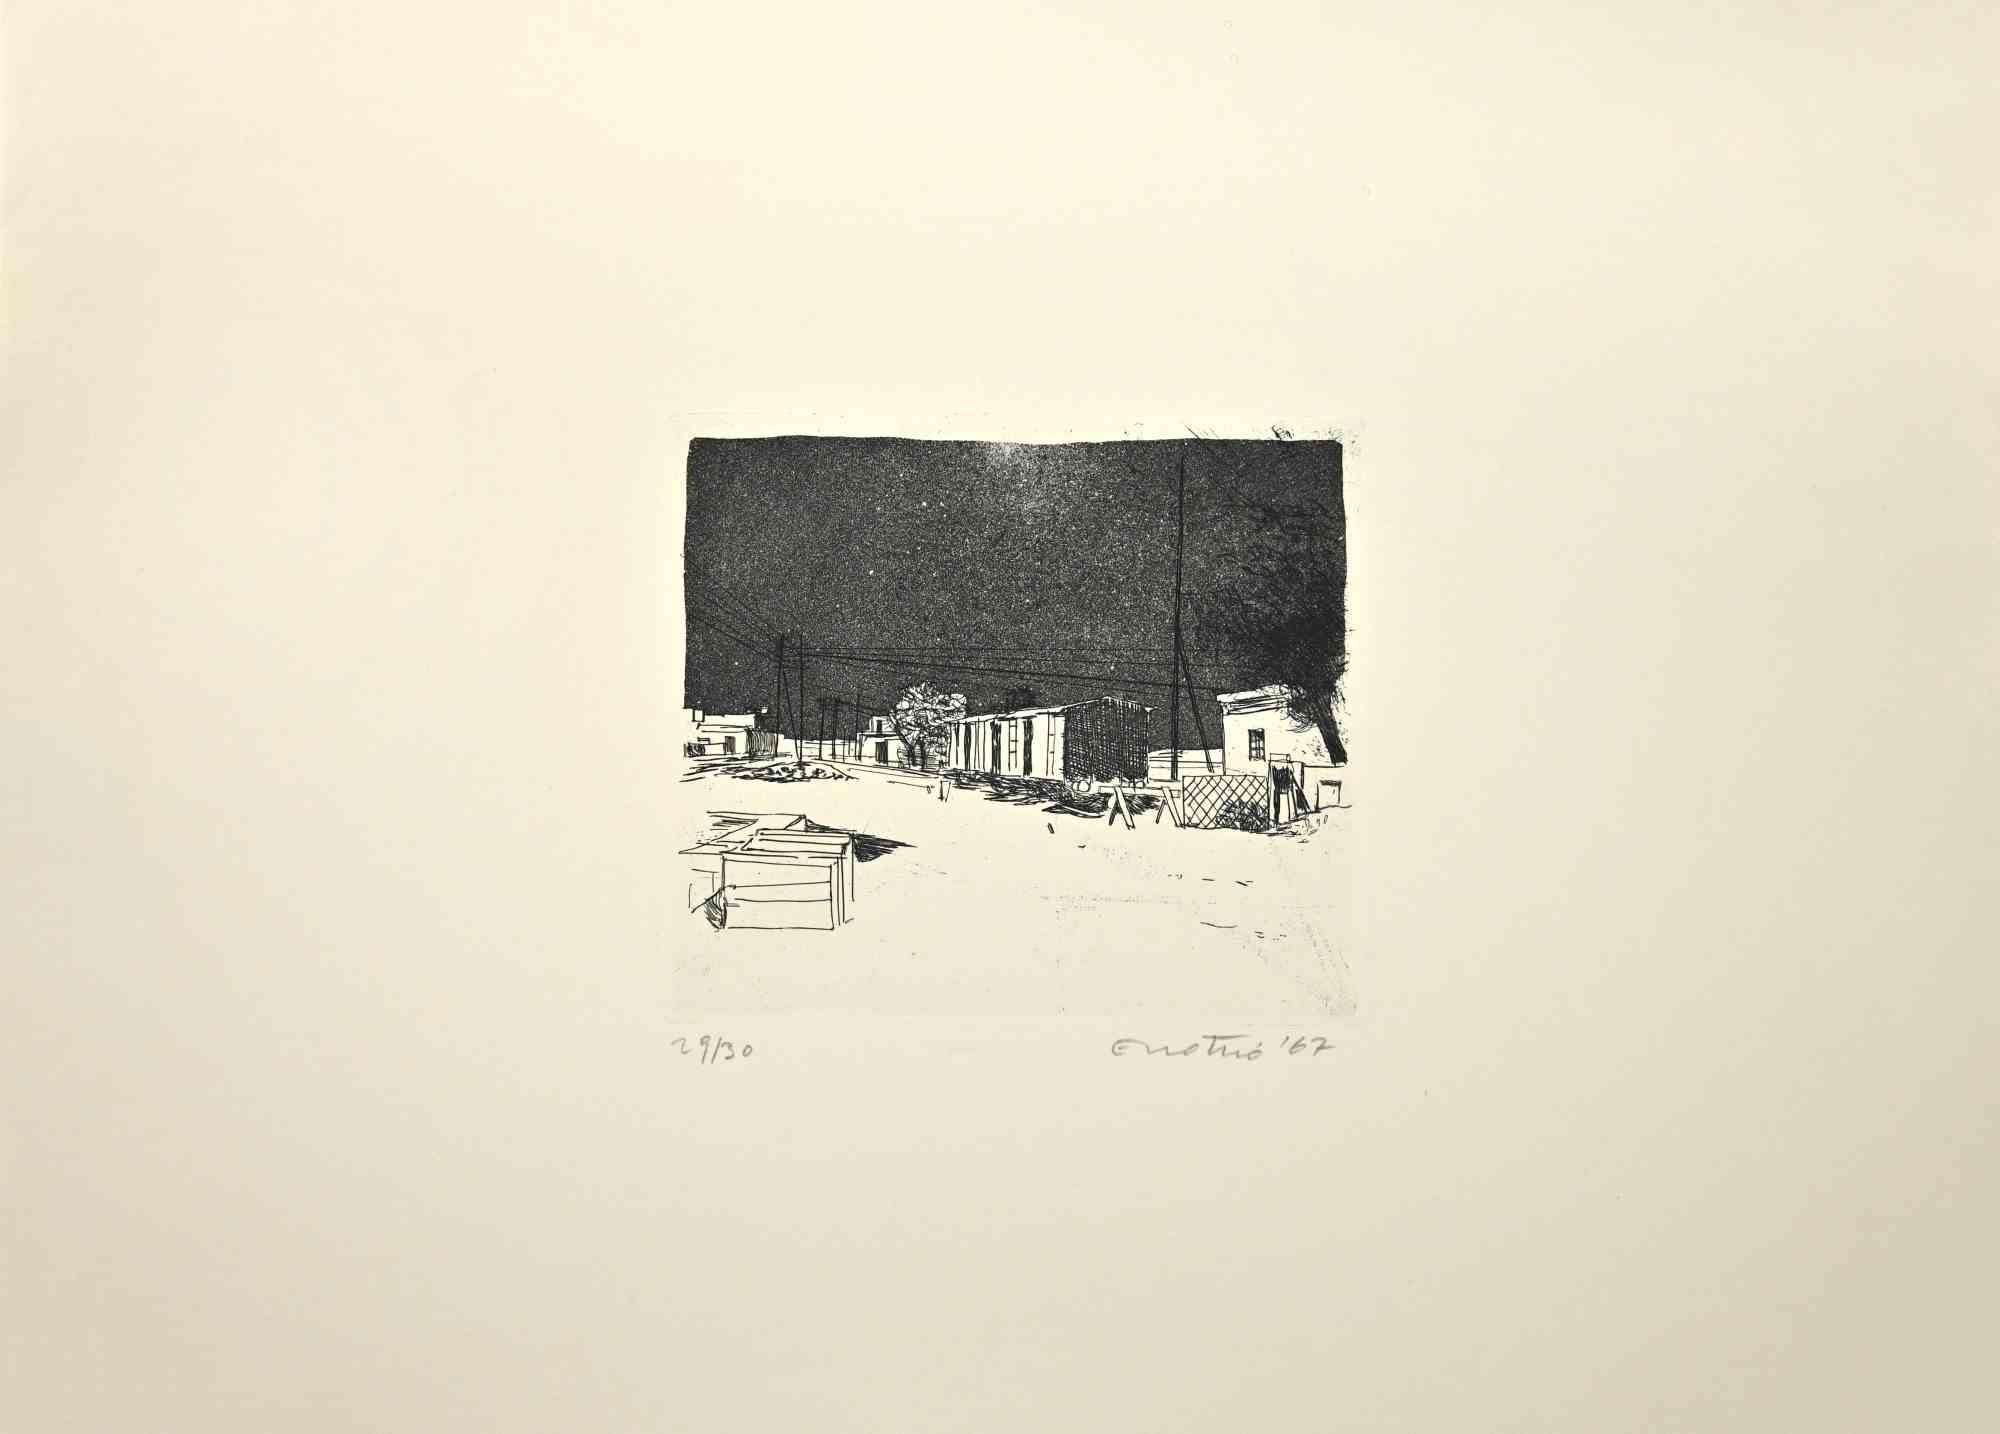 Landscape is an Etching and Aquatint realized by Enotrio Pugliese in 1967.

Hand-signed by the artist on the lower.

Numbered, Limited edition of 30 prints.

Good conditions.

Enotrio Pugliese (May 11, 1920 - August 1989) was an Italian painter.